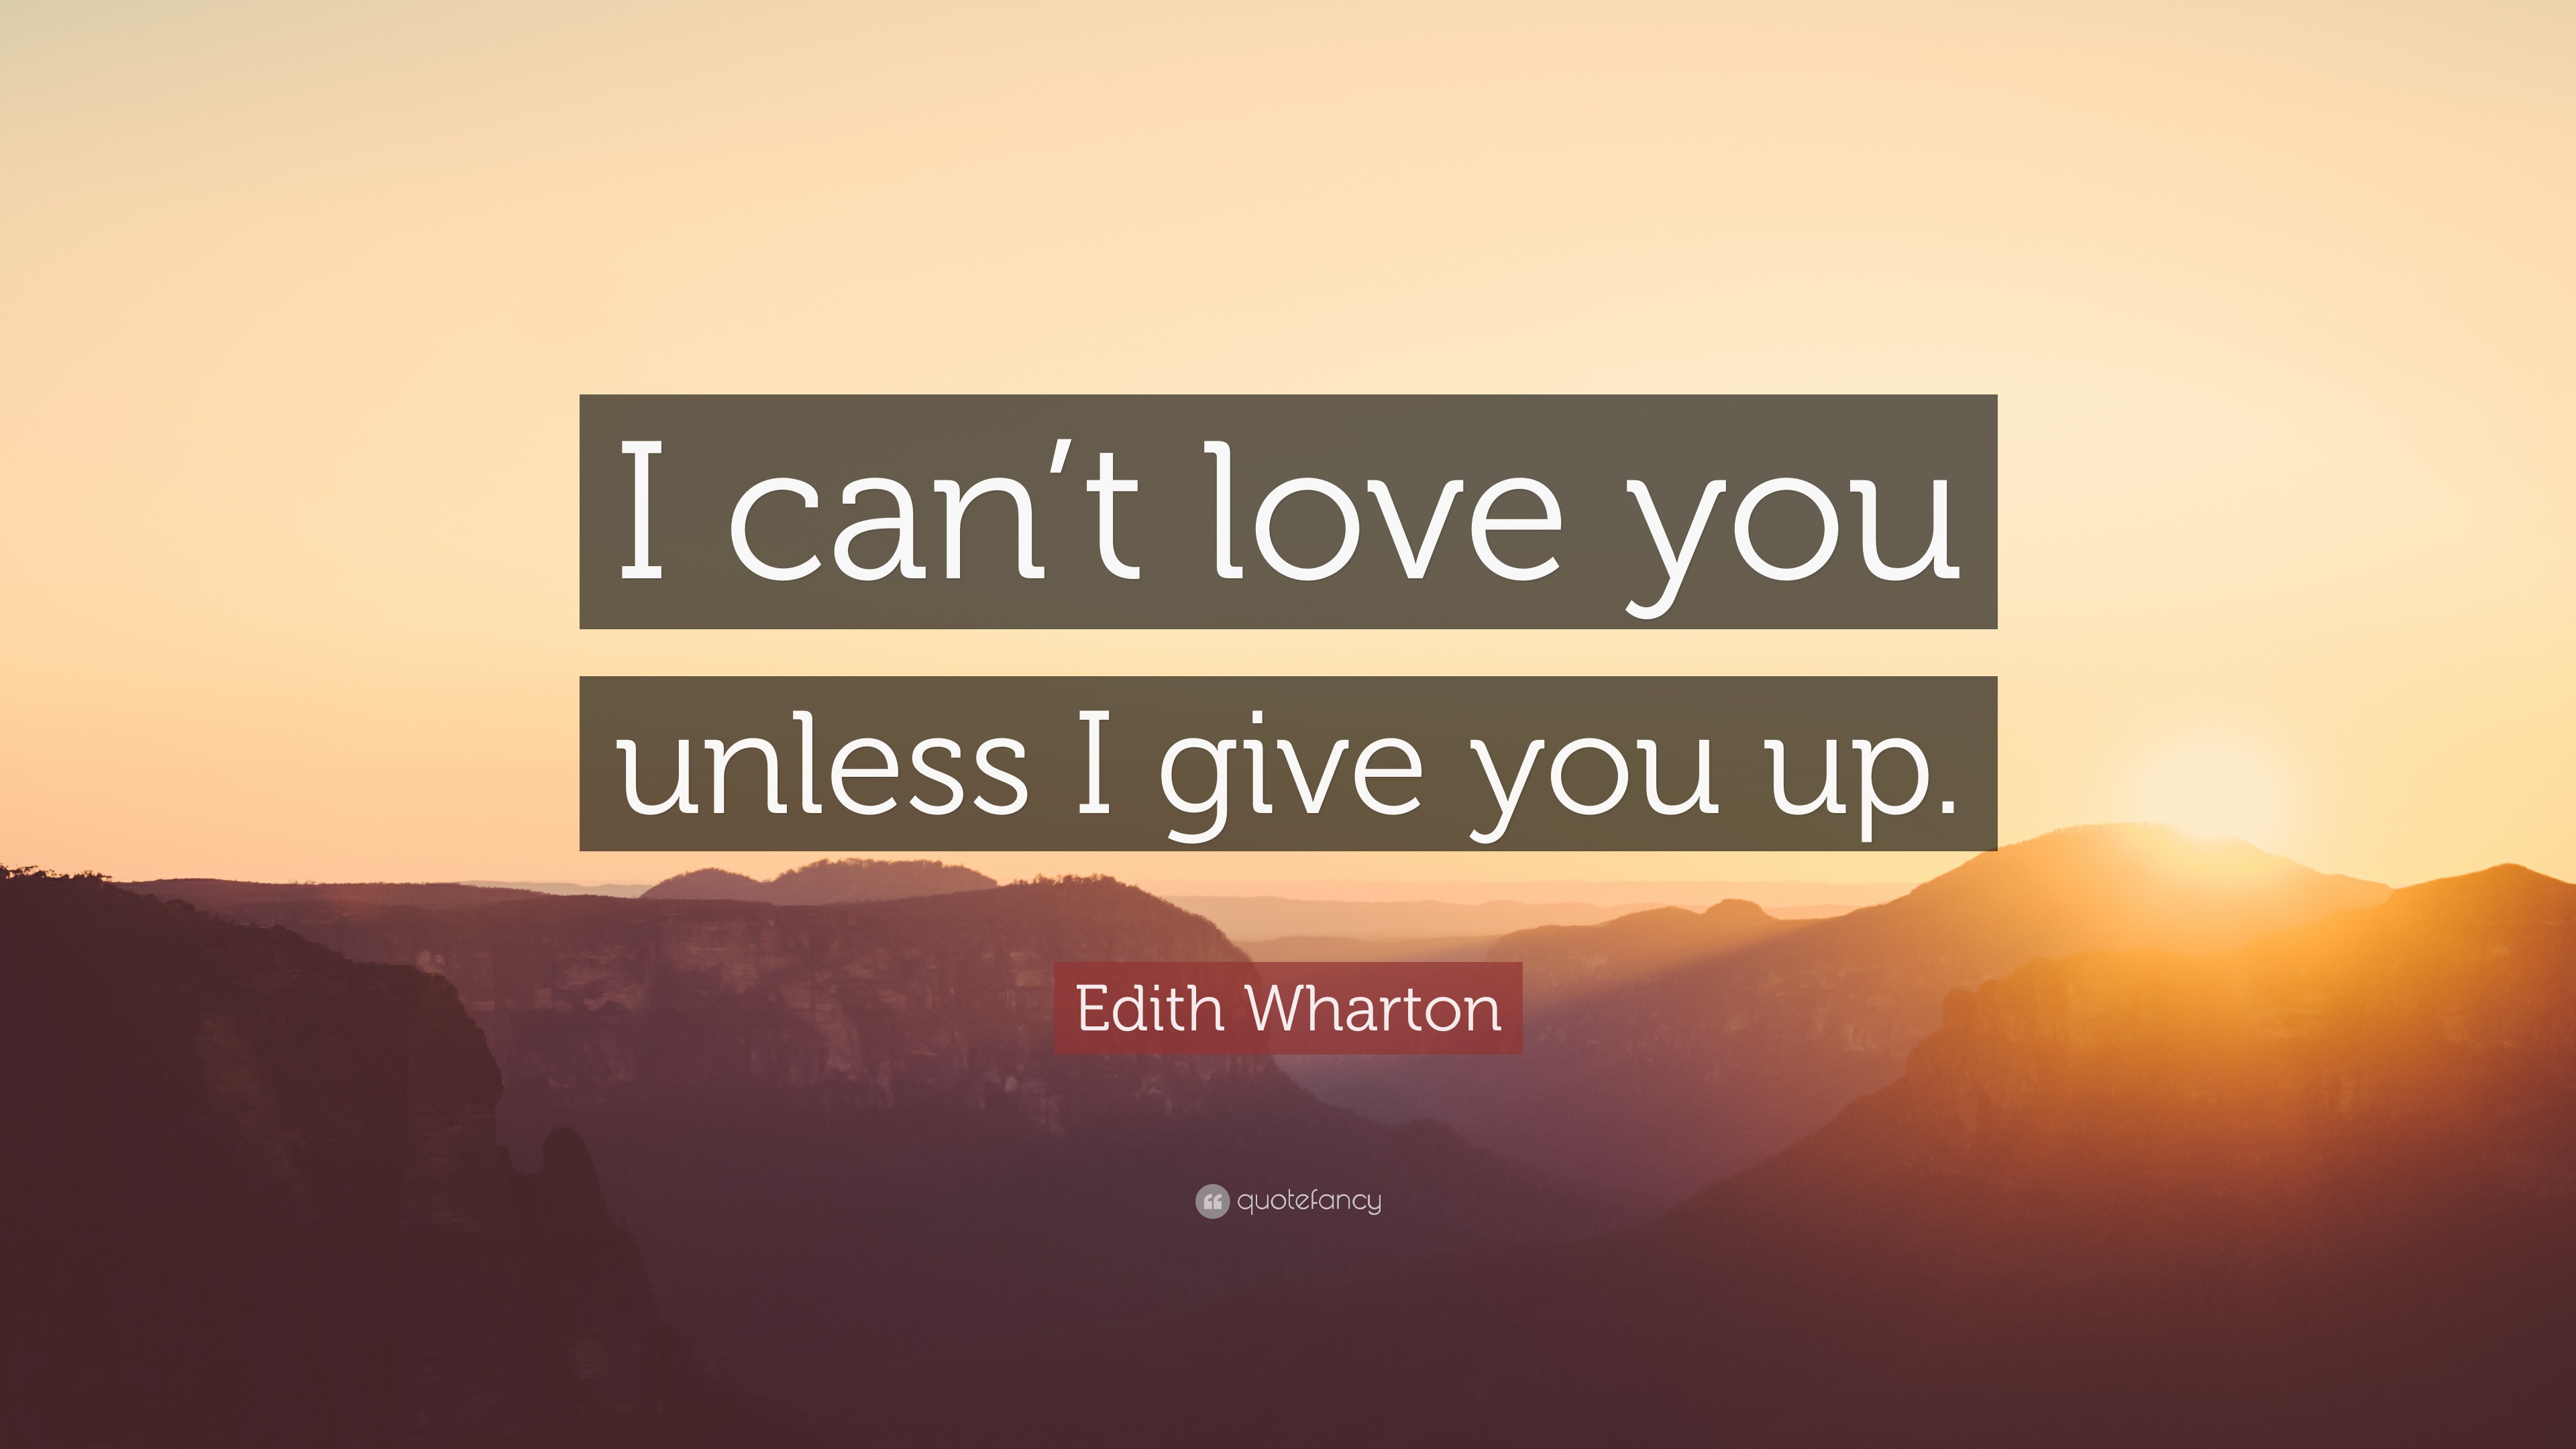 Edith Wharton Quote “I can t love you unless I give you up